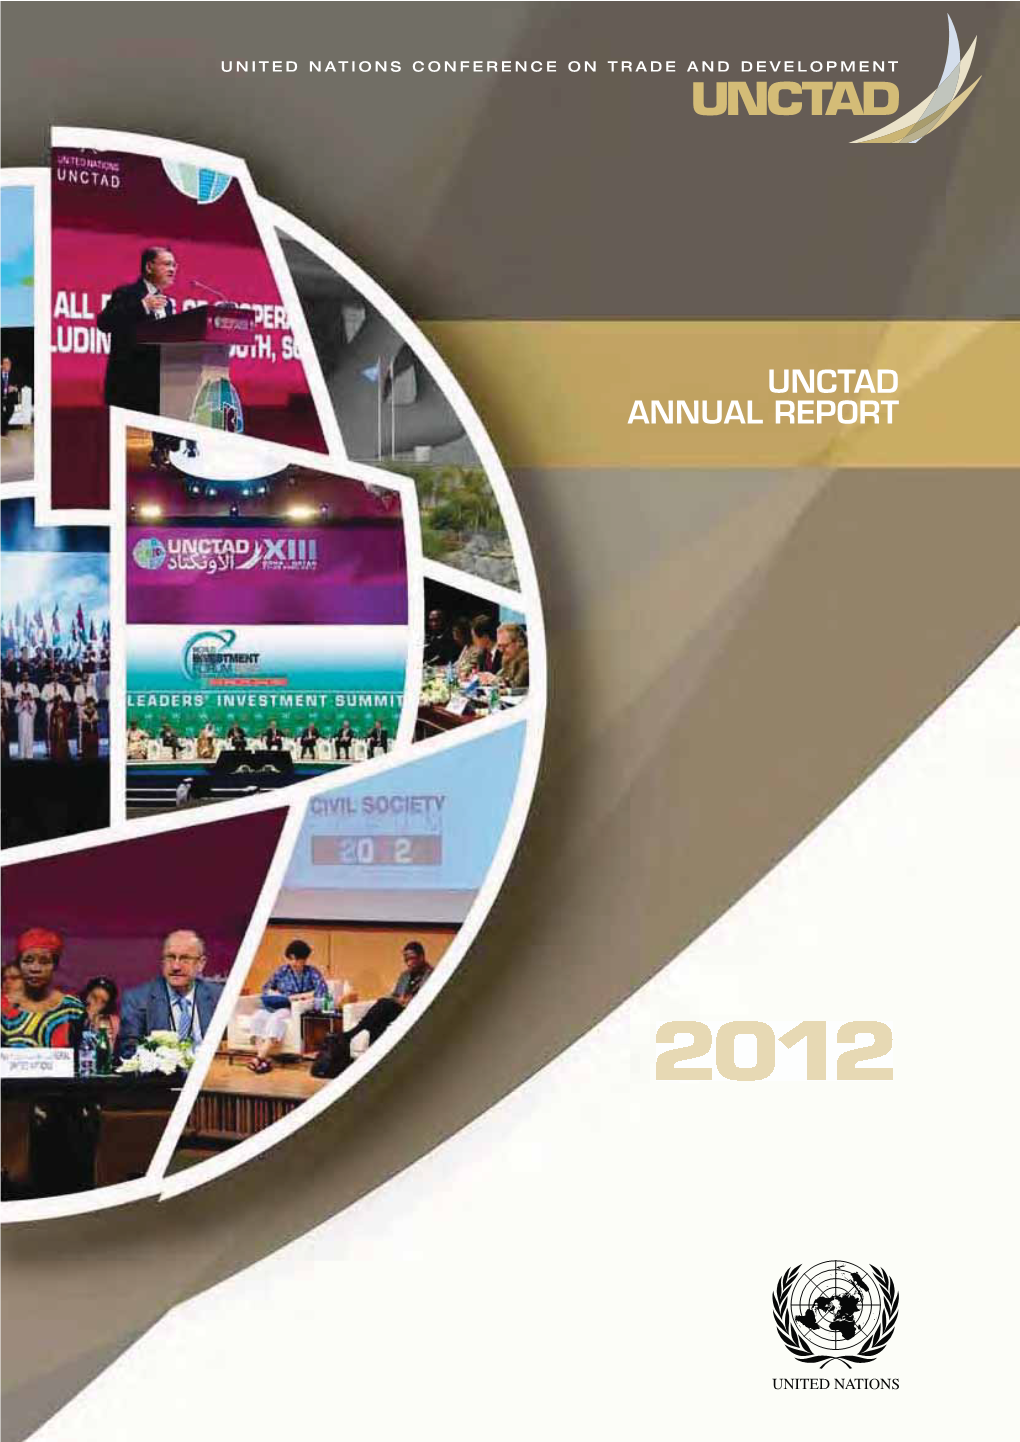 Unctad Annual Report 2012 | 1 Unctad Facts